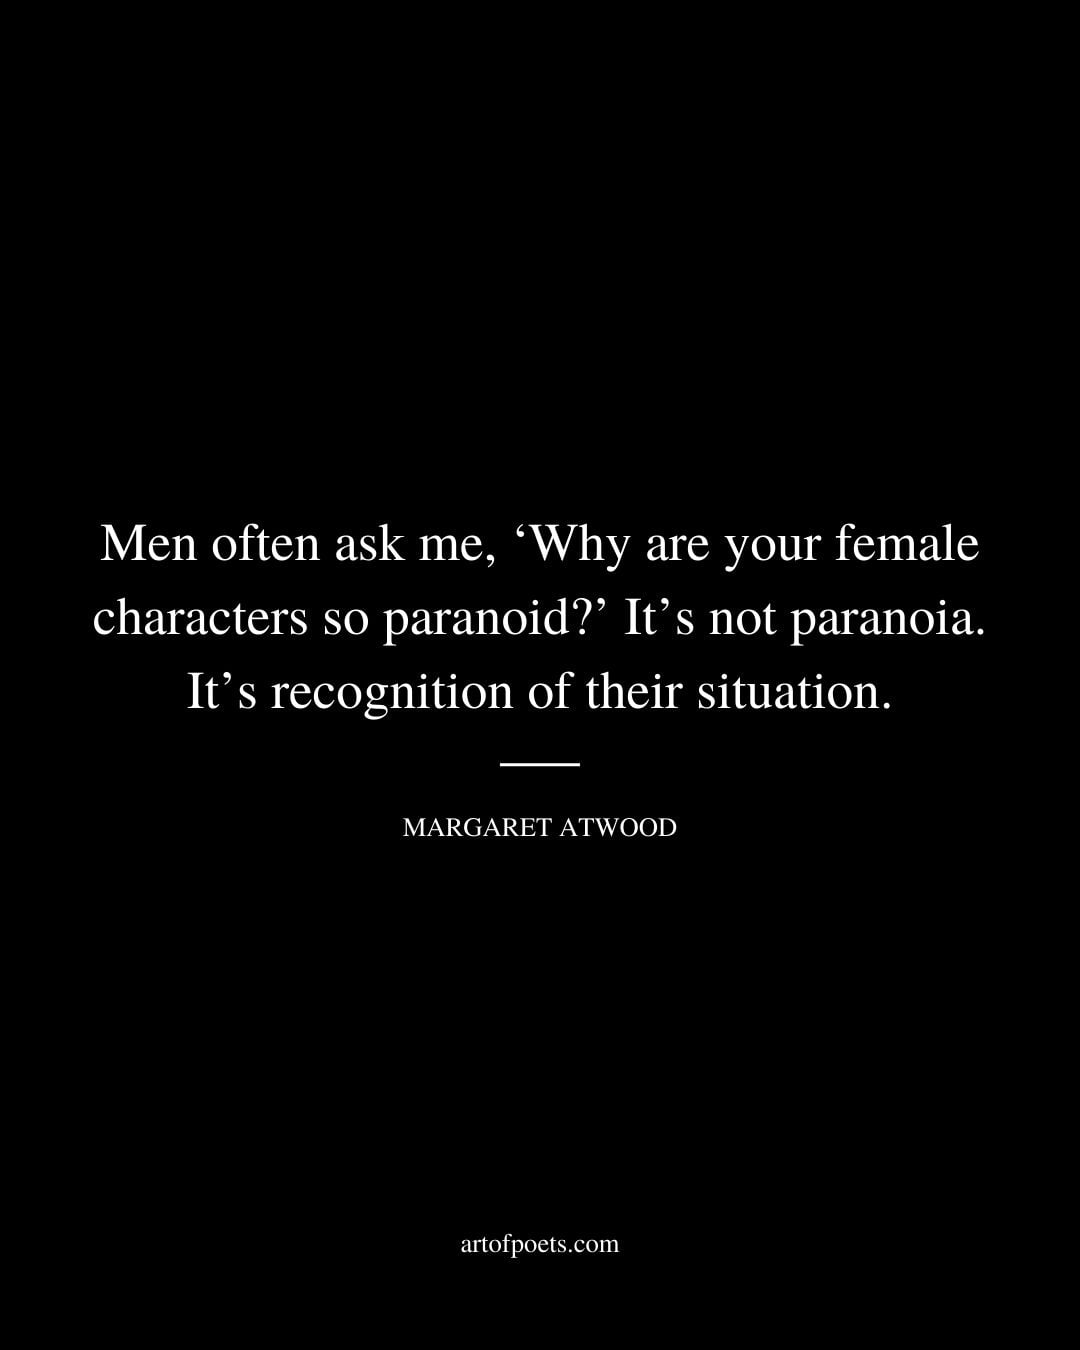 Men often ask me ‘Why are your female characters so paranoid Its not paranoia. Its recognition of their situation